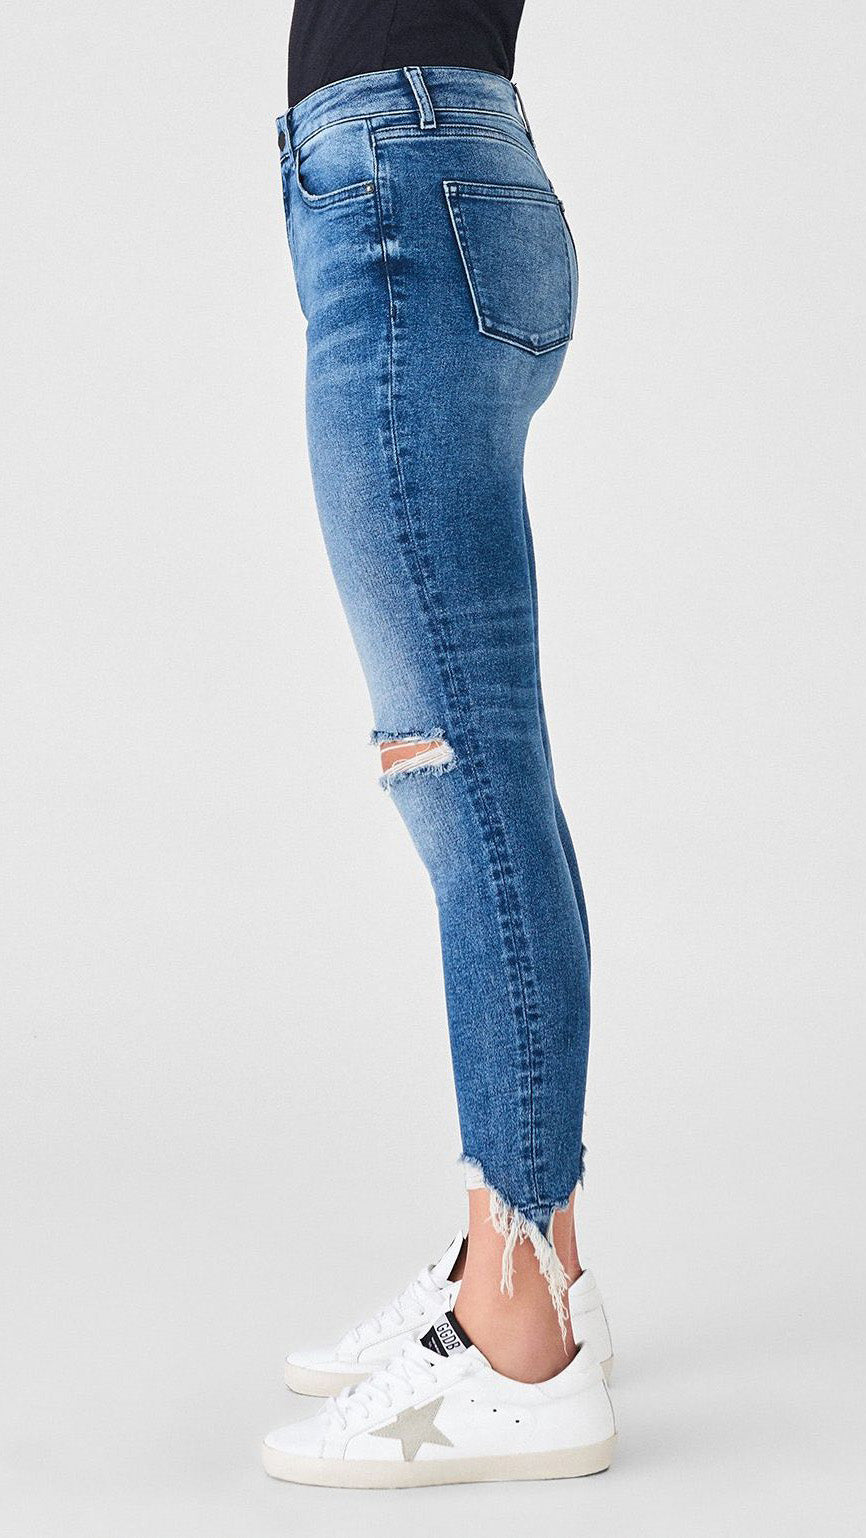 Farrow High Rise Ankle Skinny in Laramie by DL1961